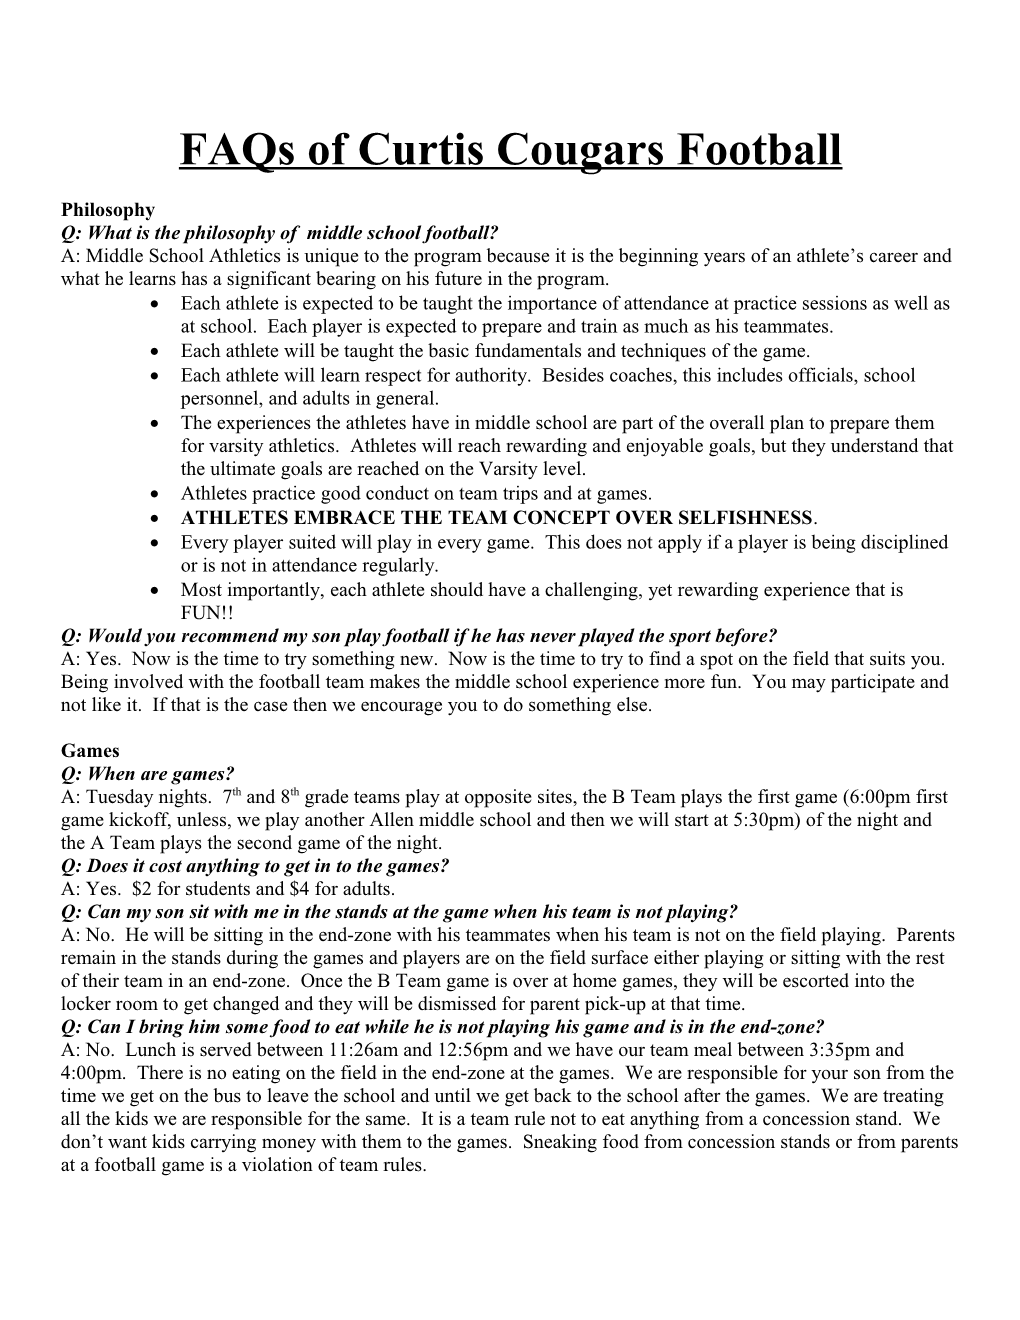 Faqs of Curtis Cougars Football